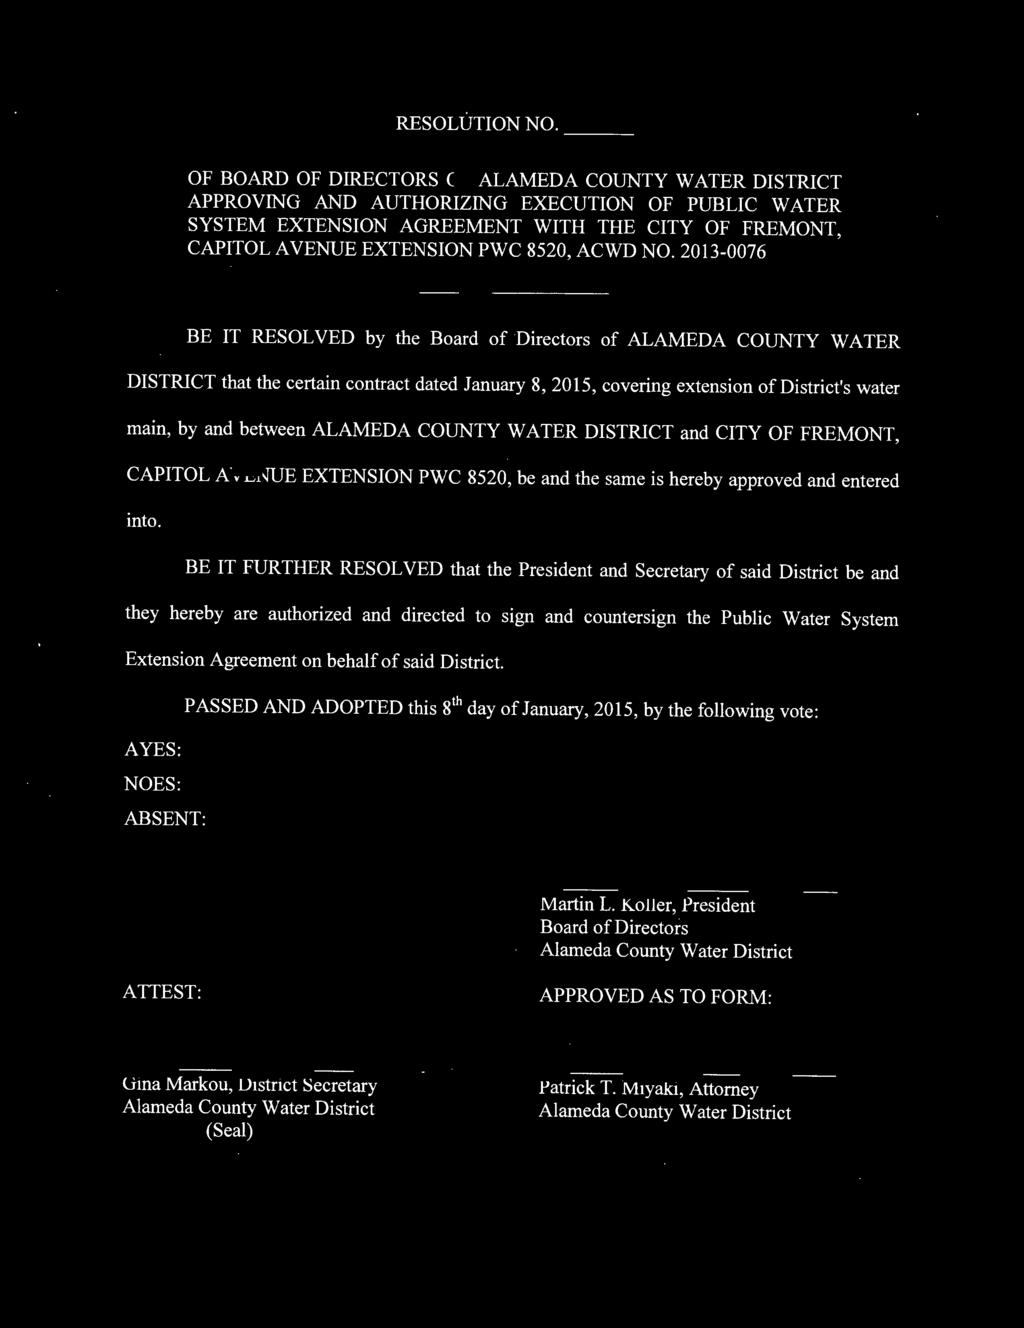 NO. 2013-0076 BE IT RESOLVED by the Board of Directors of ALAMEDA COUNTY WATER DISTRICT that the certain contract dated January 8, 2015, covering extension of District's water main, by and between